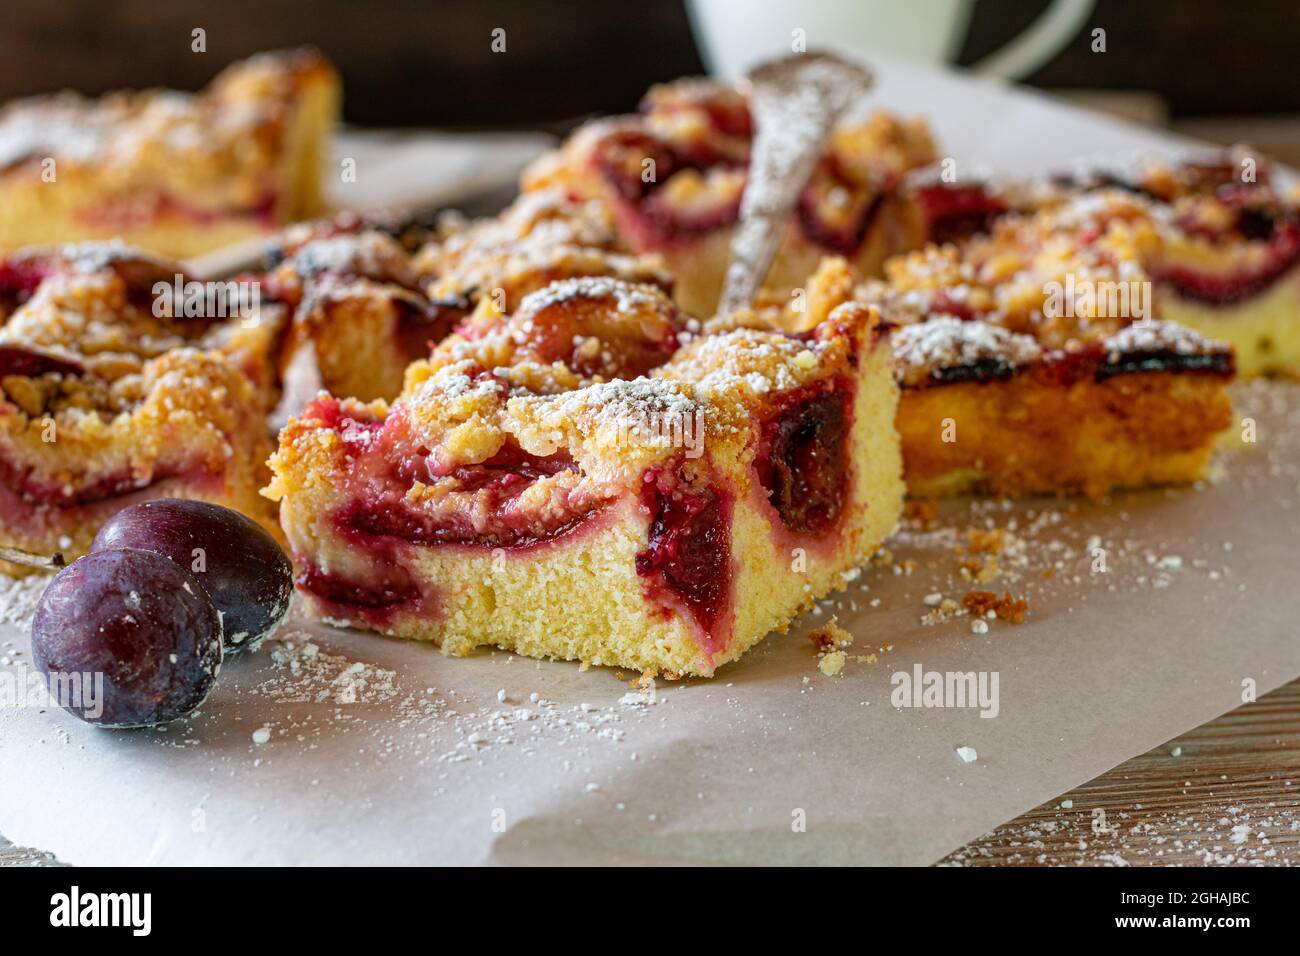 Plum crumble cake sliced on a plate on coffee table Stock Photo